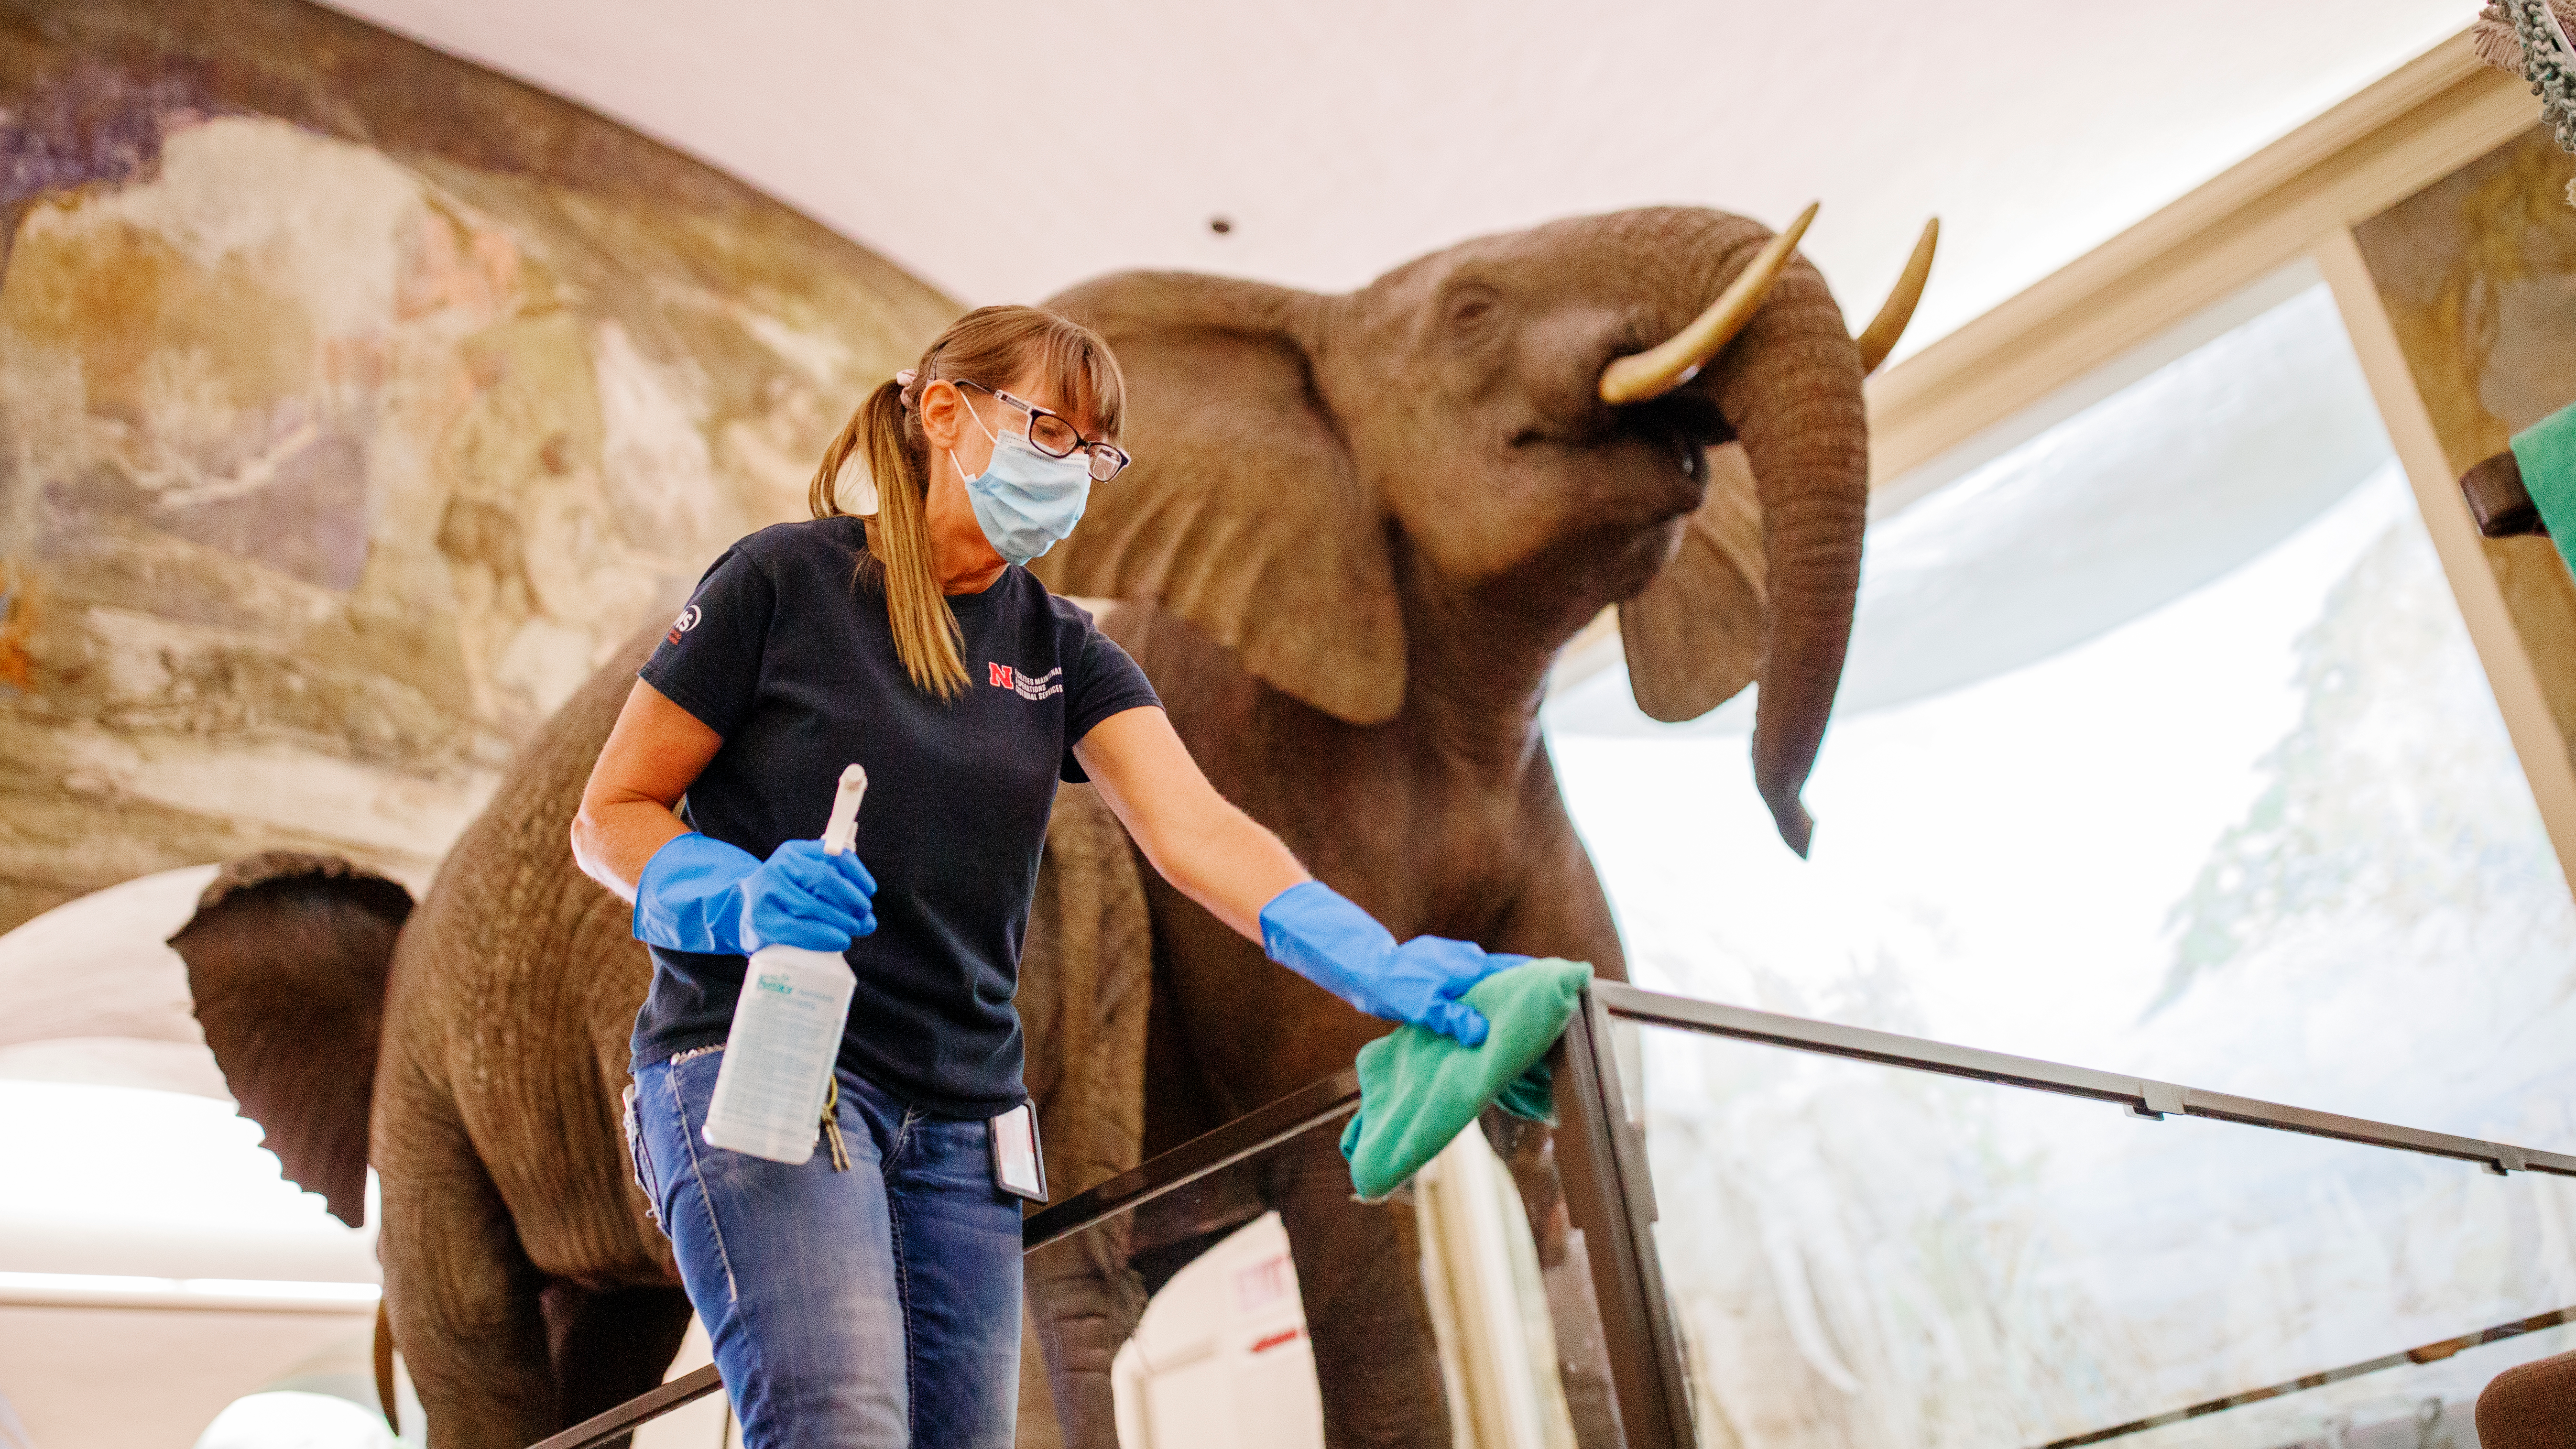 Cleaning Morrill hall